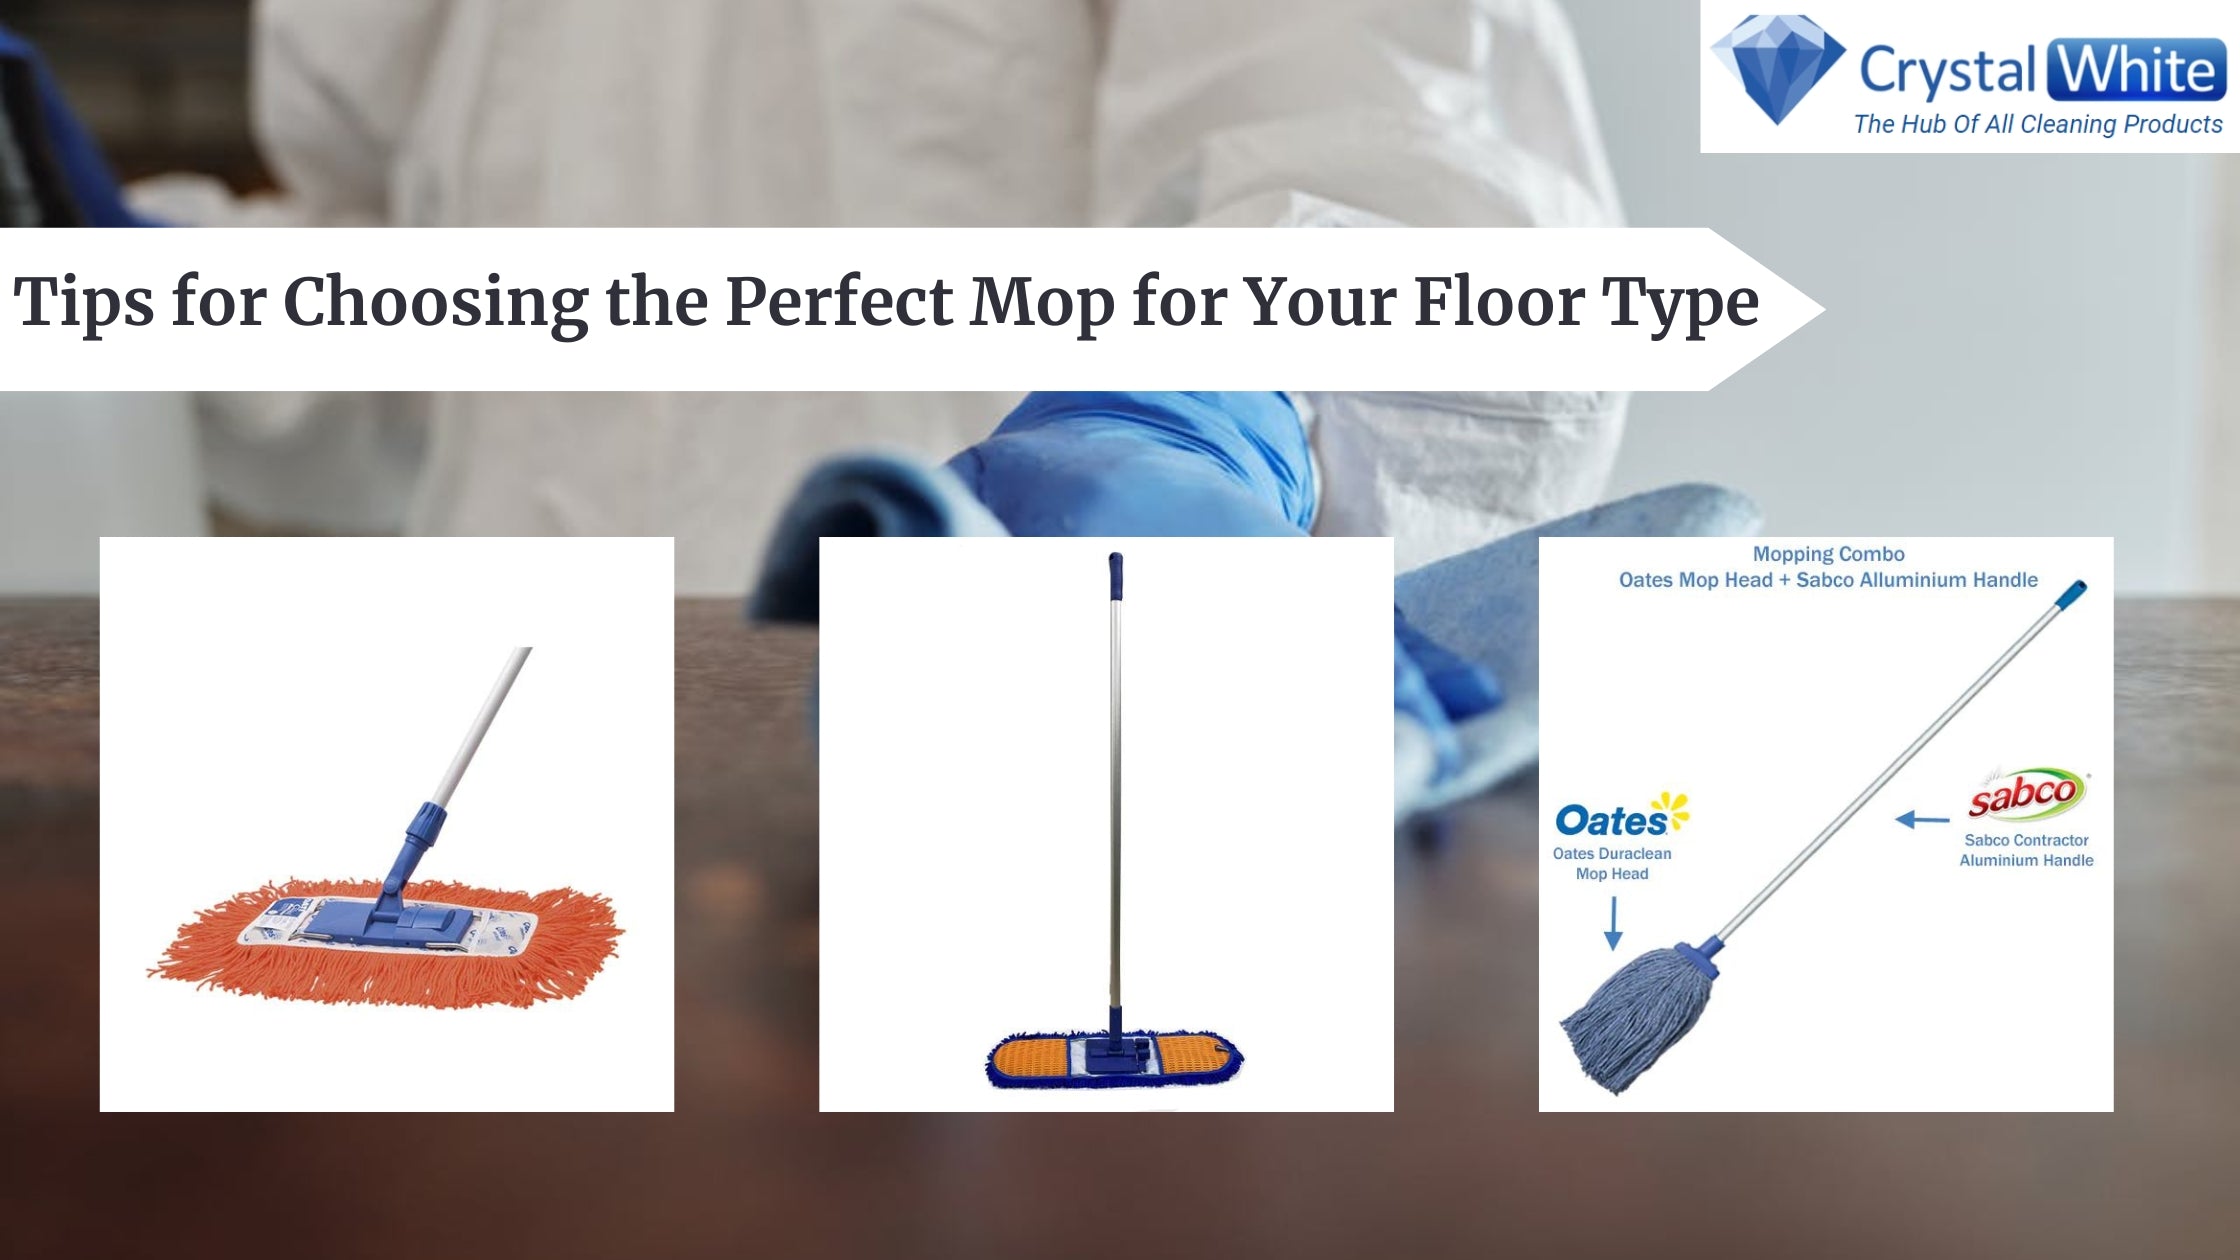 5 Must Know Tips for Choosing the Perfect Mop for Your Floor Type